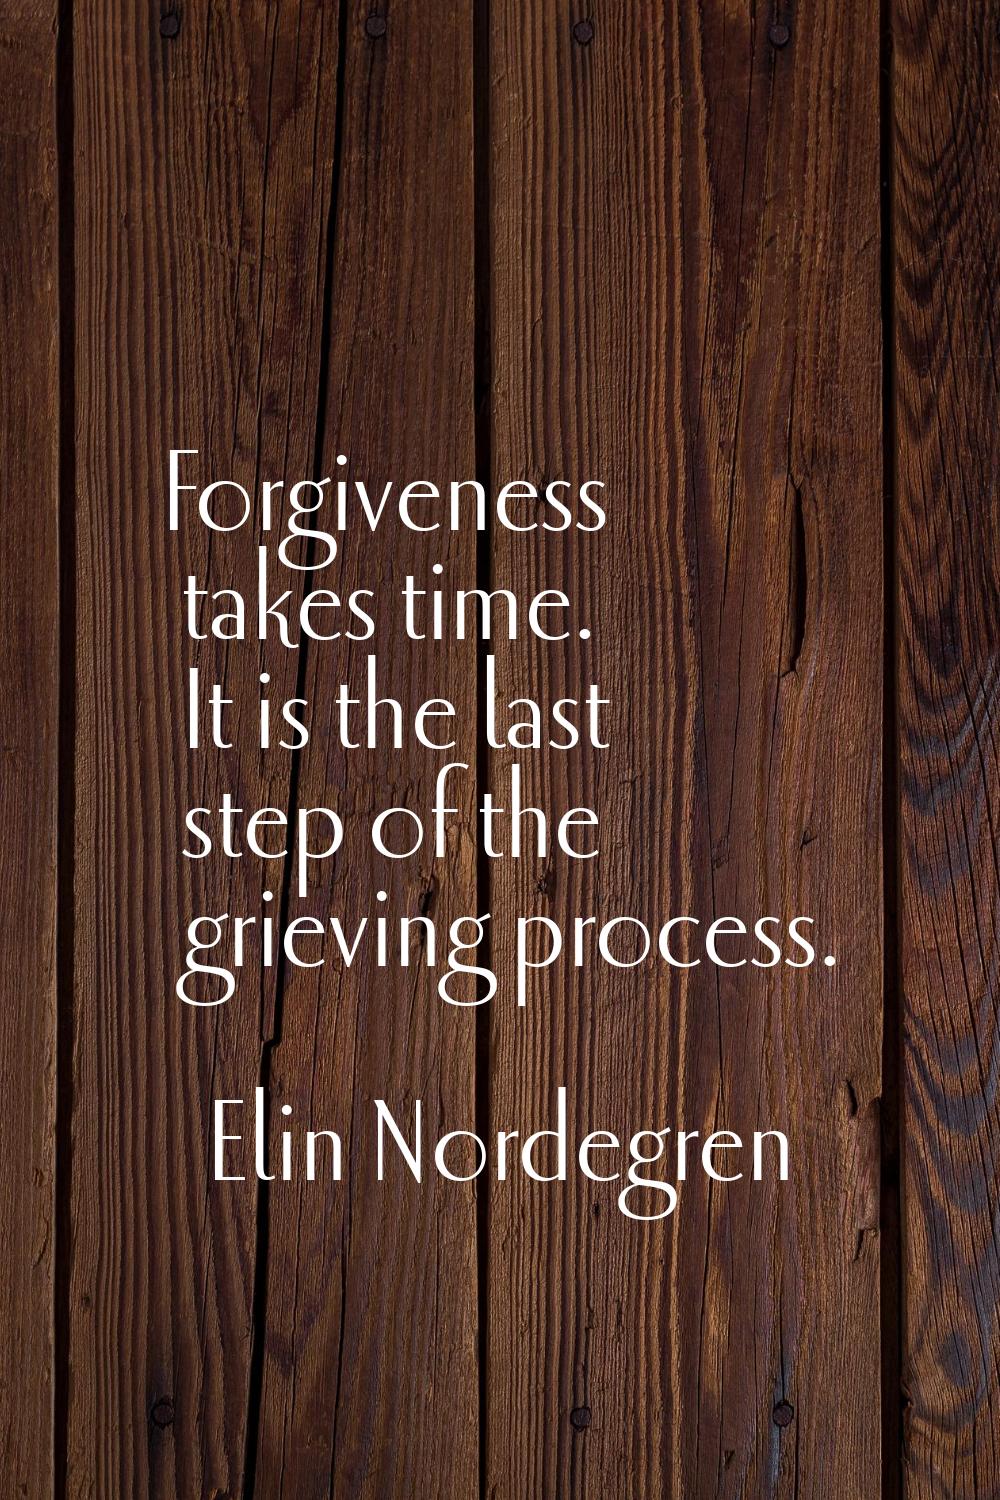 Forgiveness takes time. It is the last step of the grieving process.